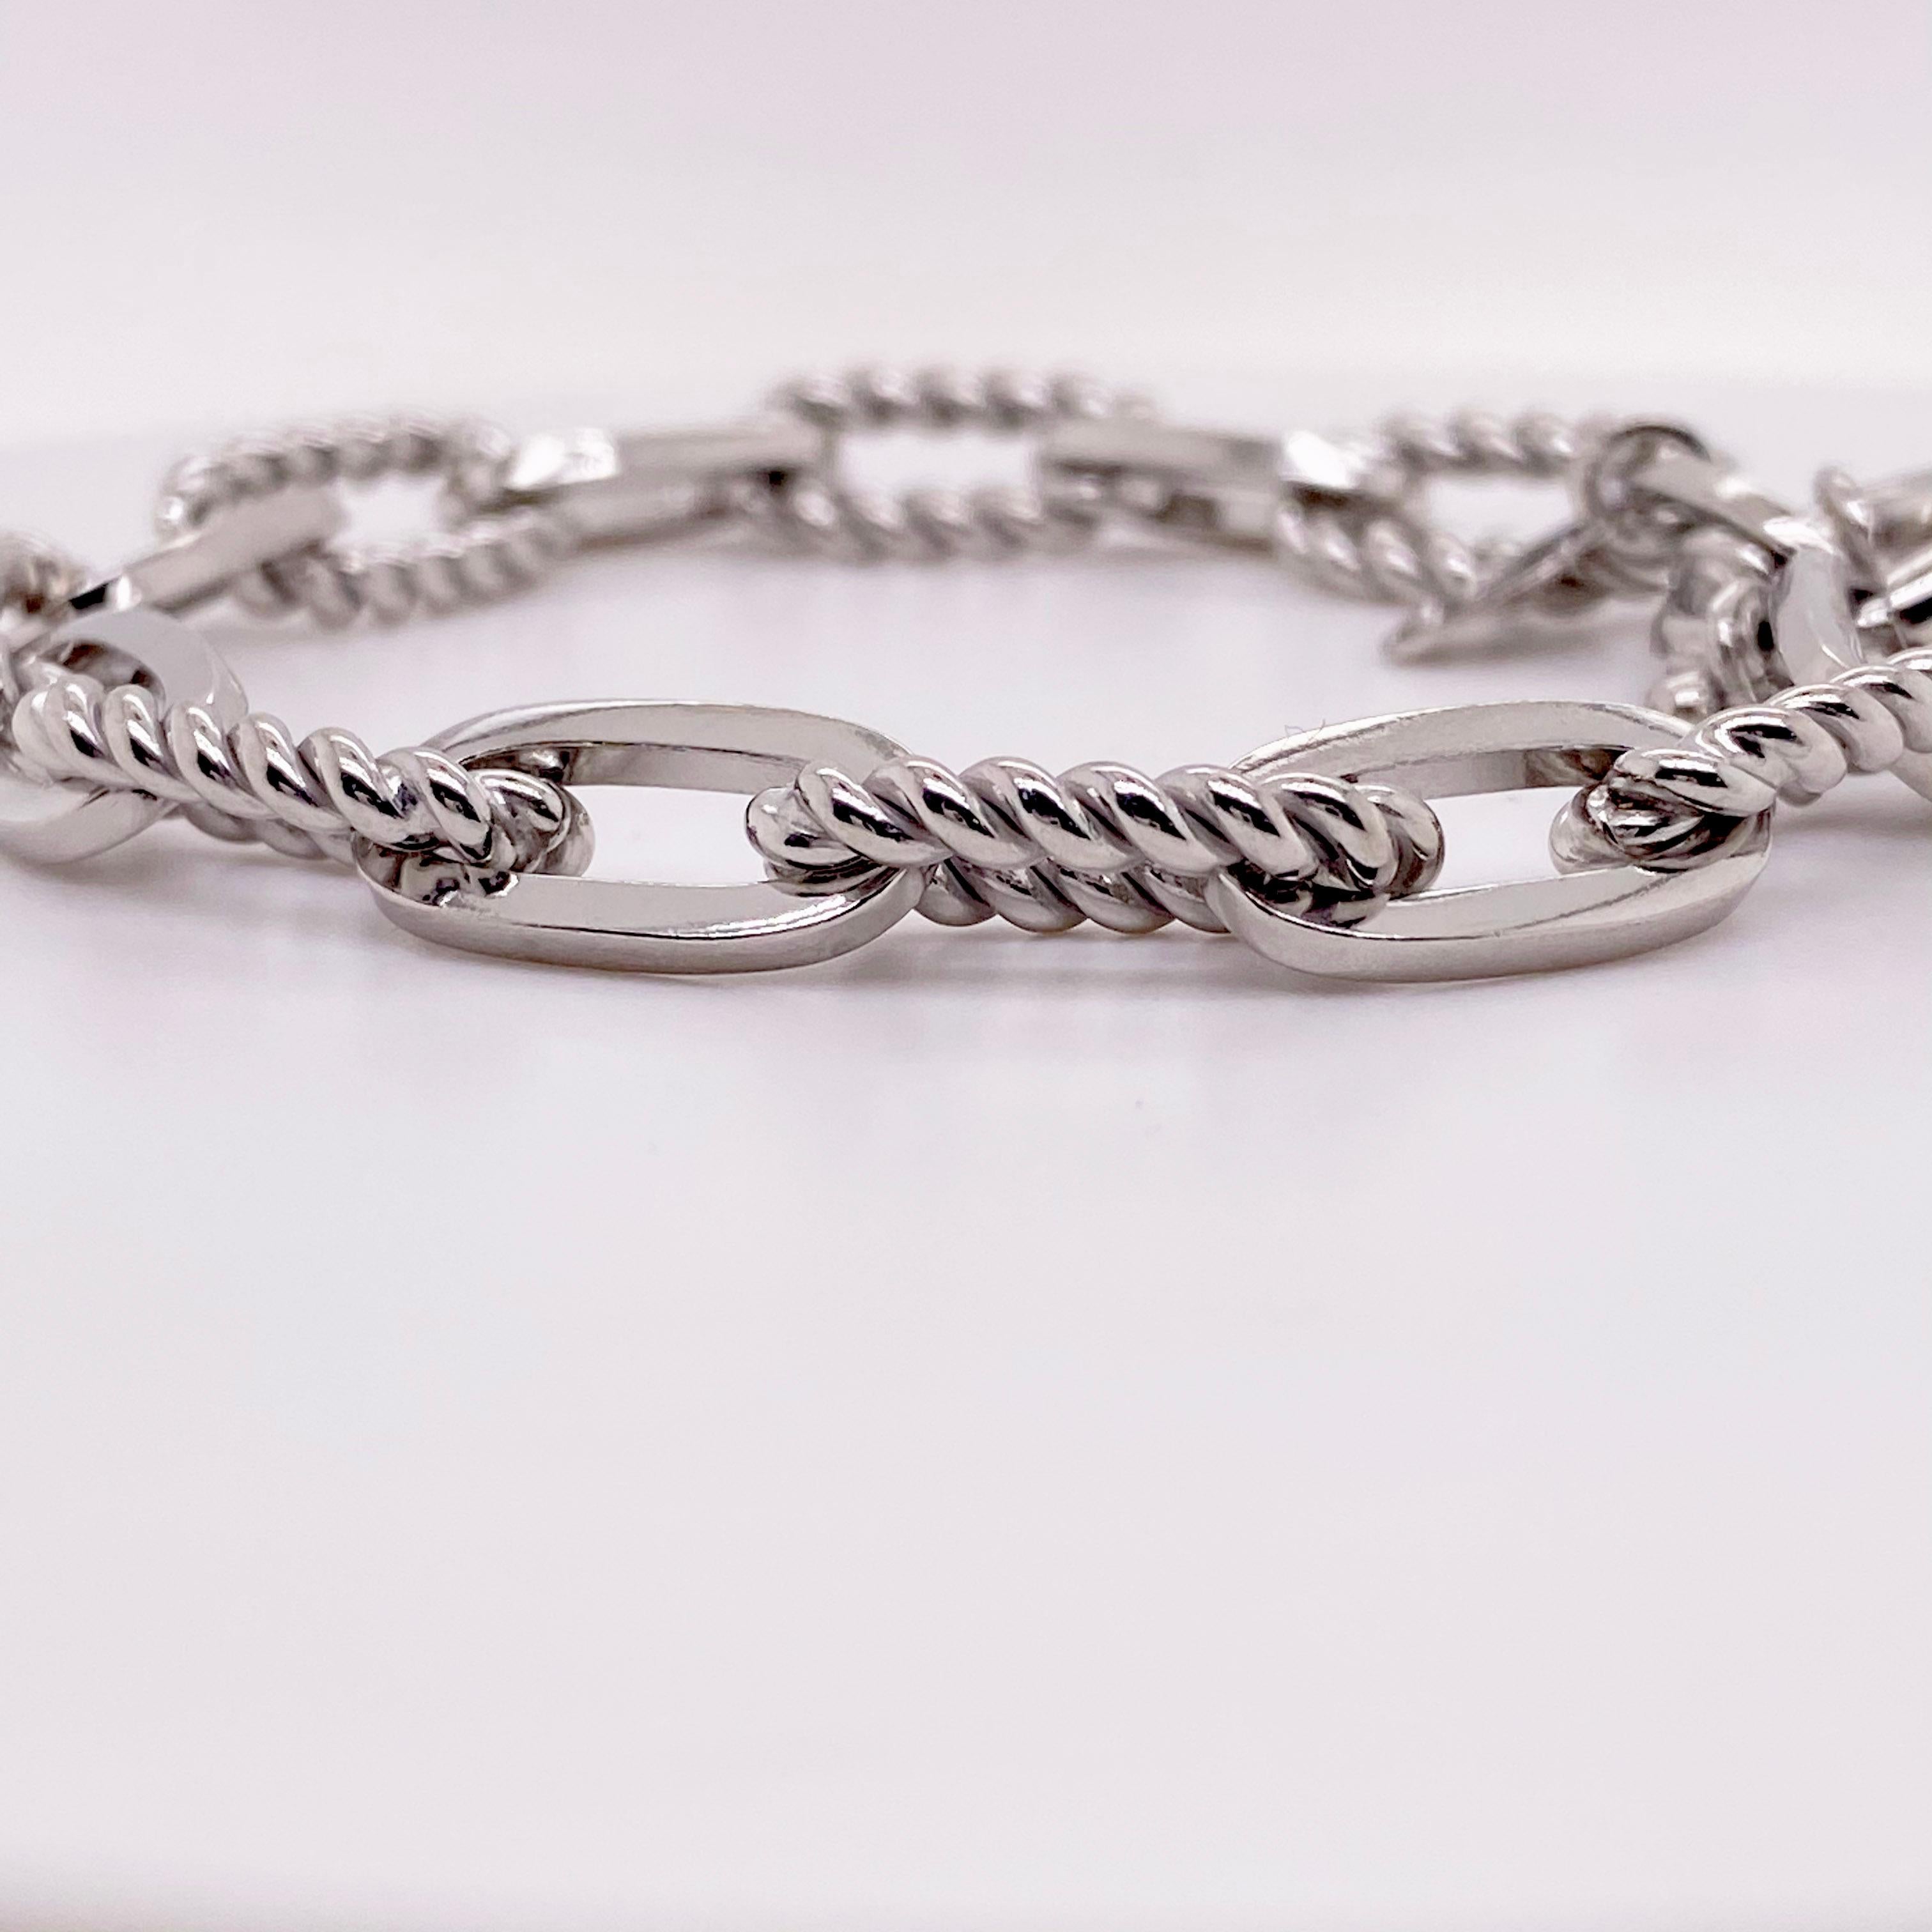 The details for this gorgeous bracelet are listed below:
Metal Quality: Sterling Silver 
Length: 7.5 in 
Width: 7.8 mm 
Clasp: Spring Ring Large
Total Gram Weight: 21.8 g 